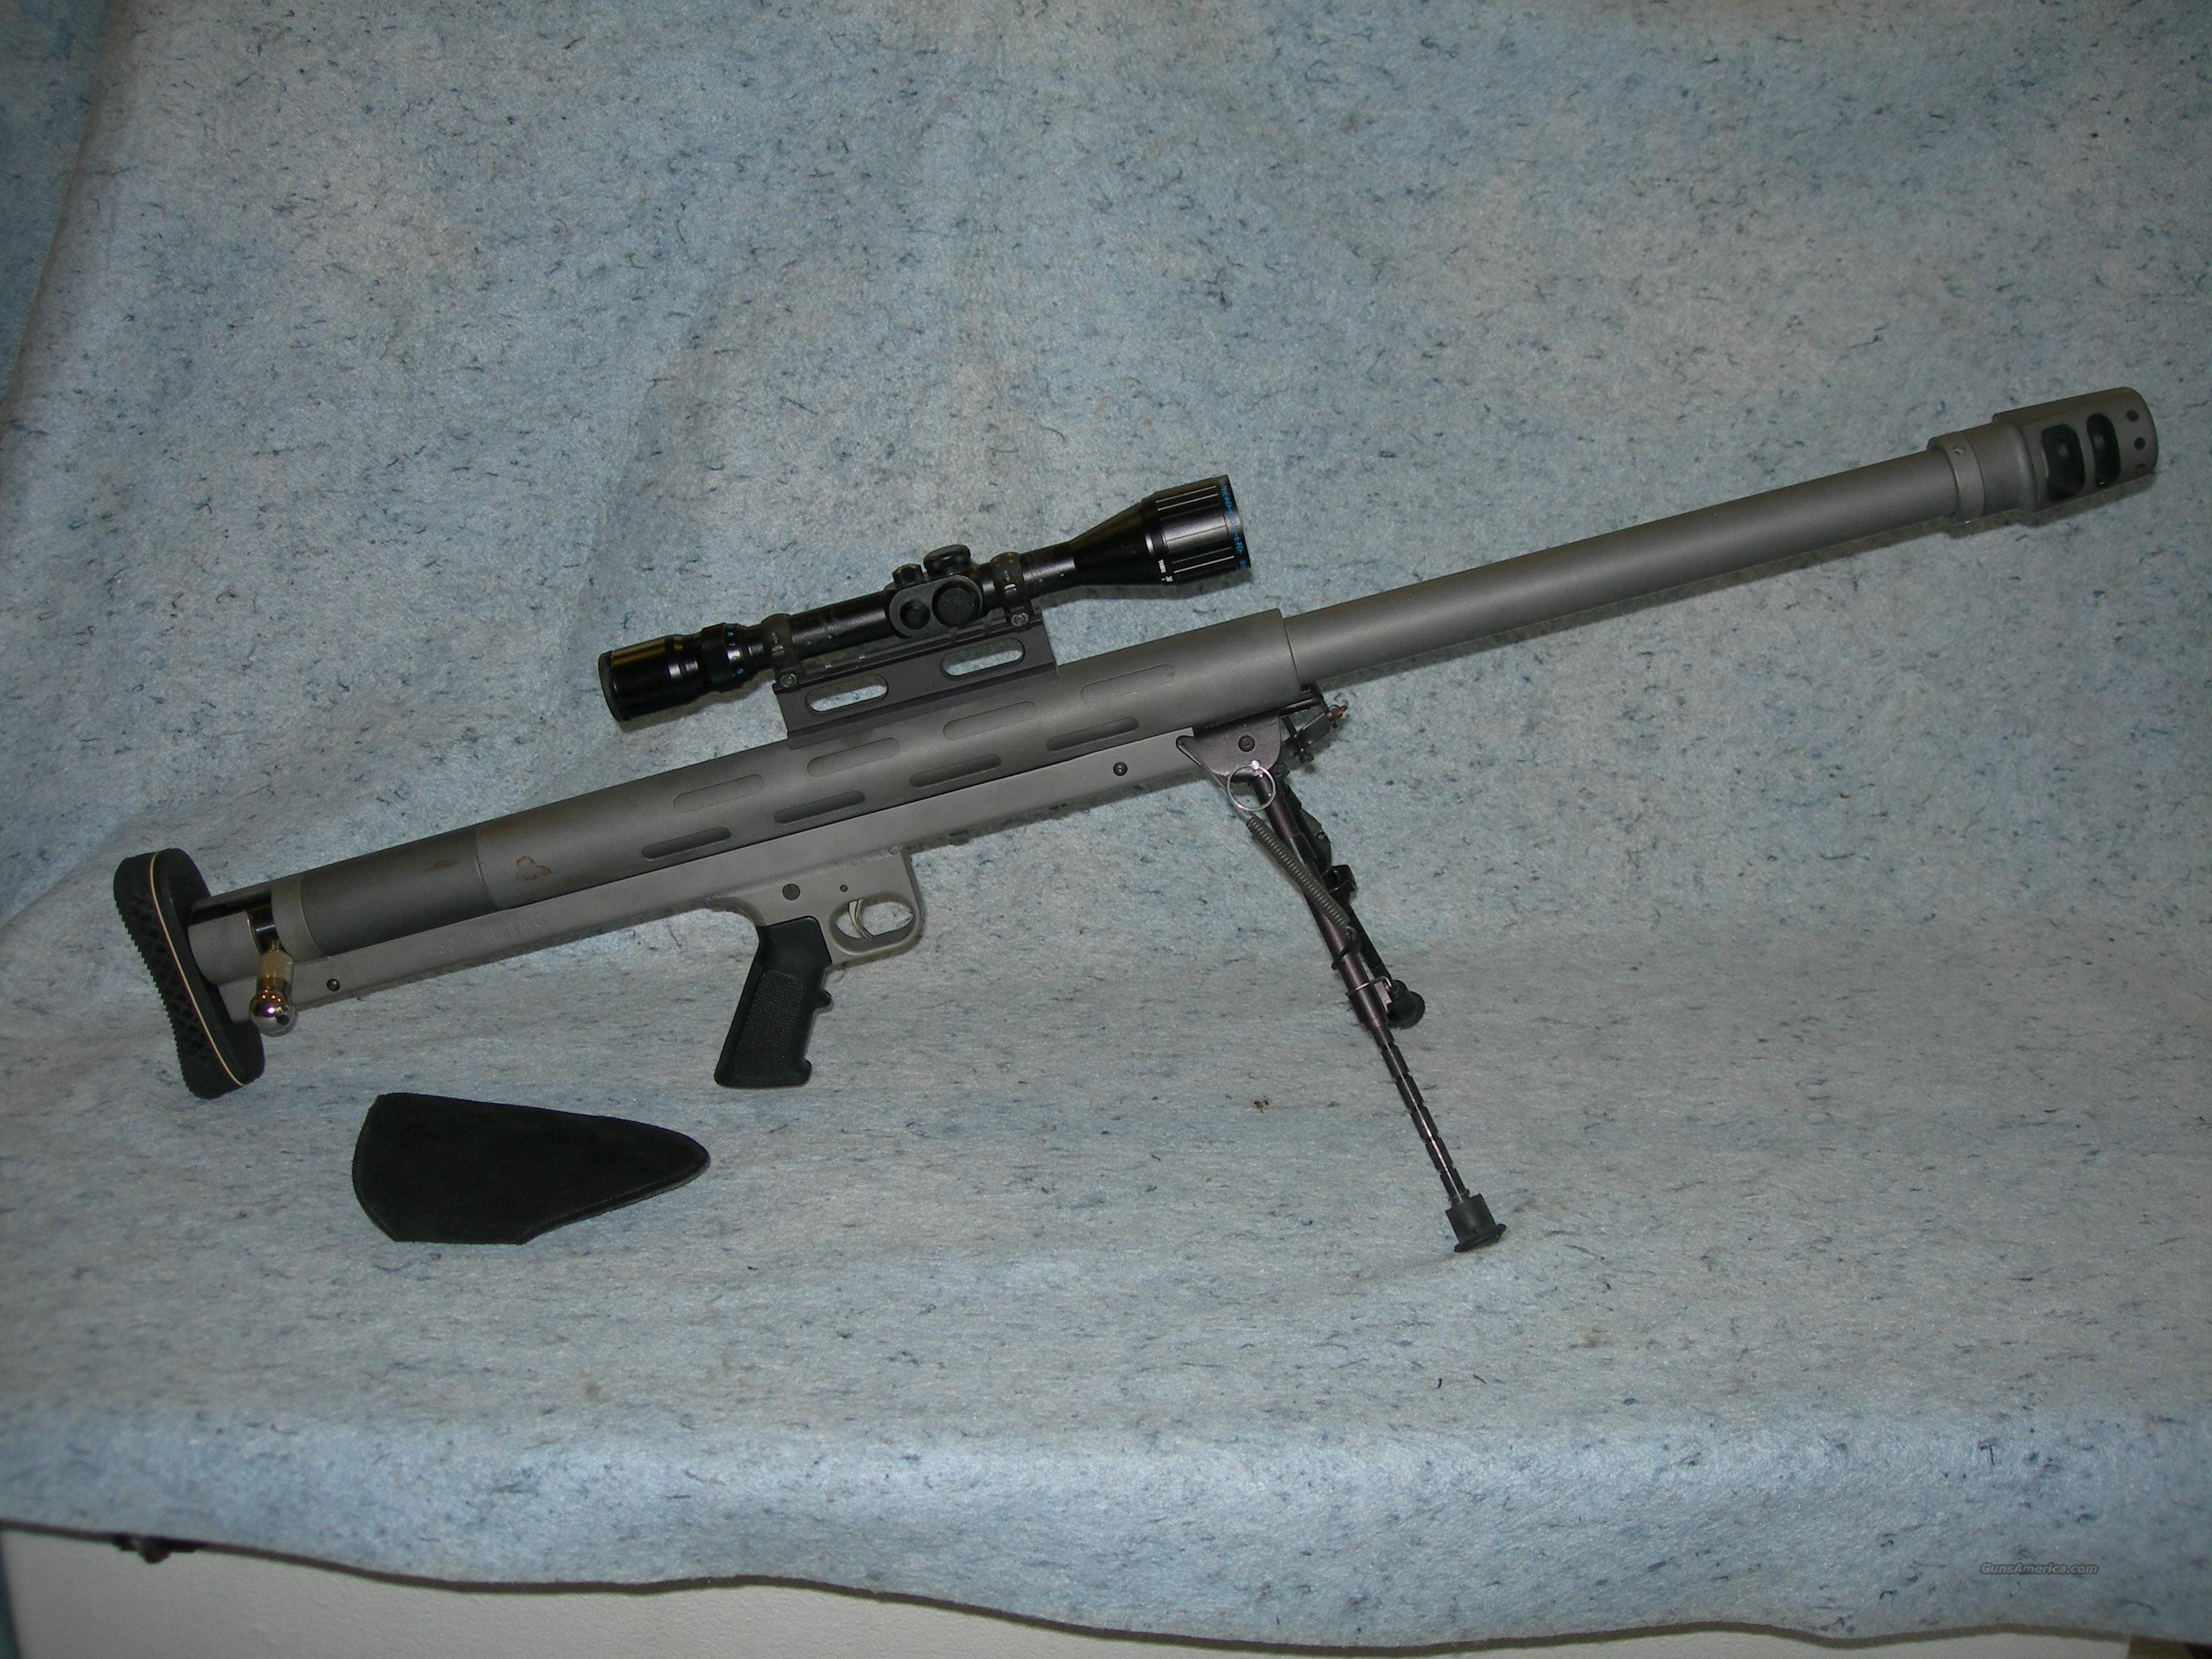 LAR Grizzly Big Boar 50 BMG With Scope Plus 60 AP Rds For Sale 912364240.